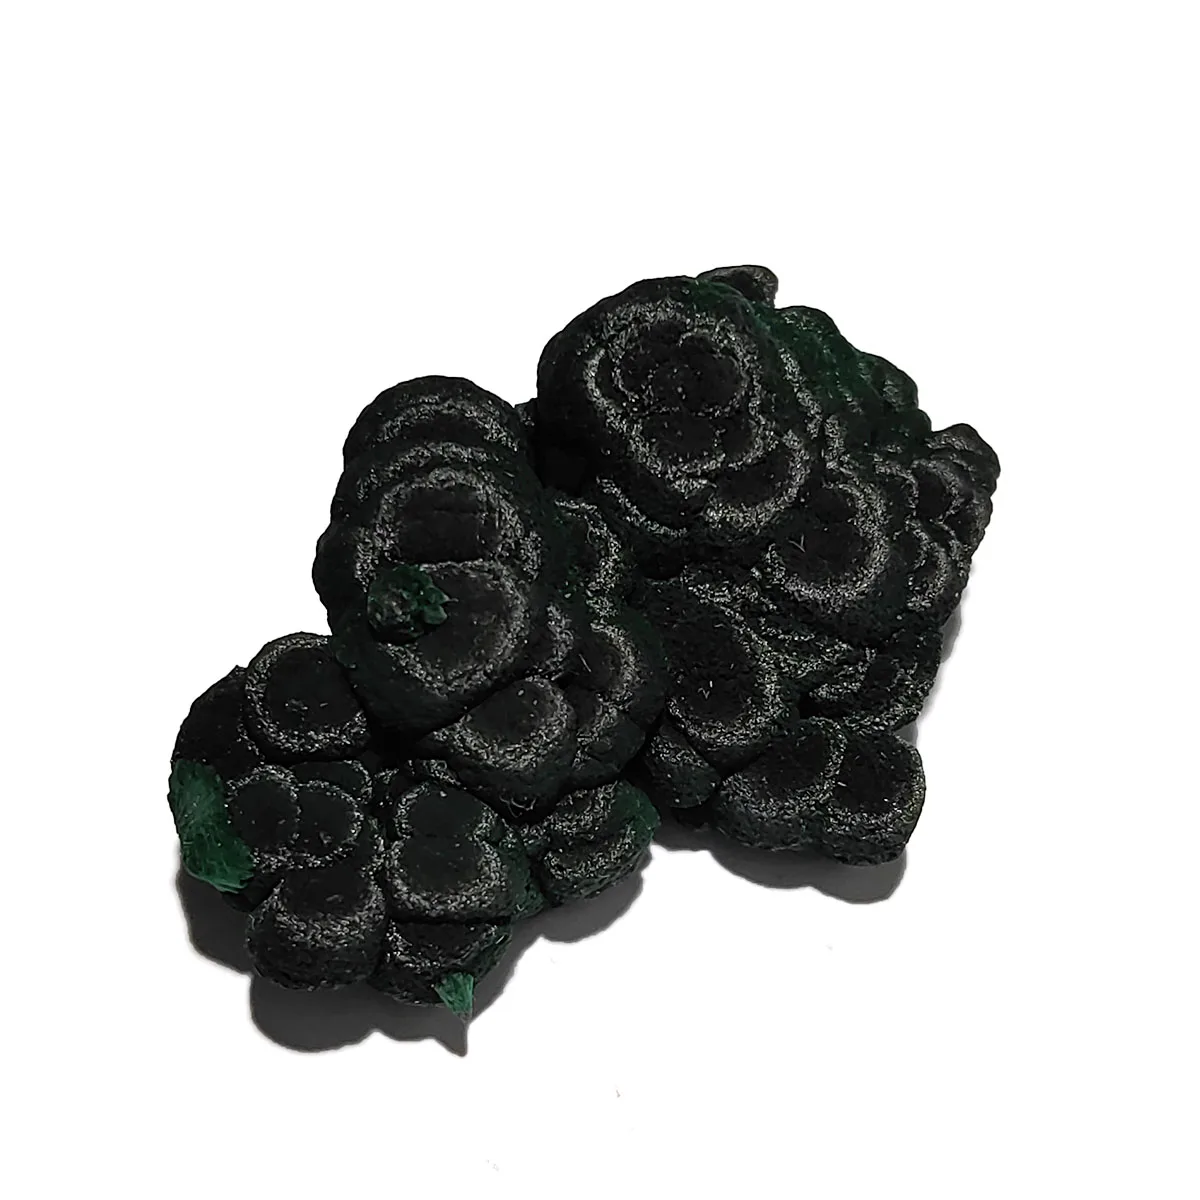 C1-1B High Quality 100% Natural Velvet Malachite Mineral Crystal Trinkets Home Decoration From Congo